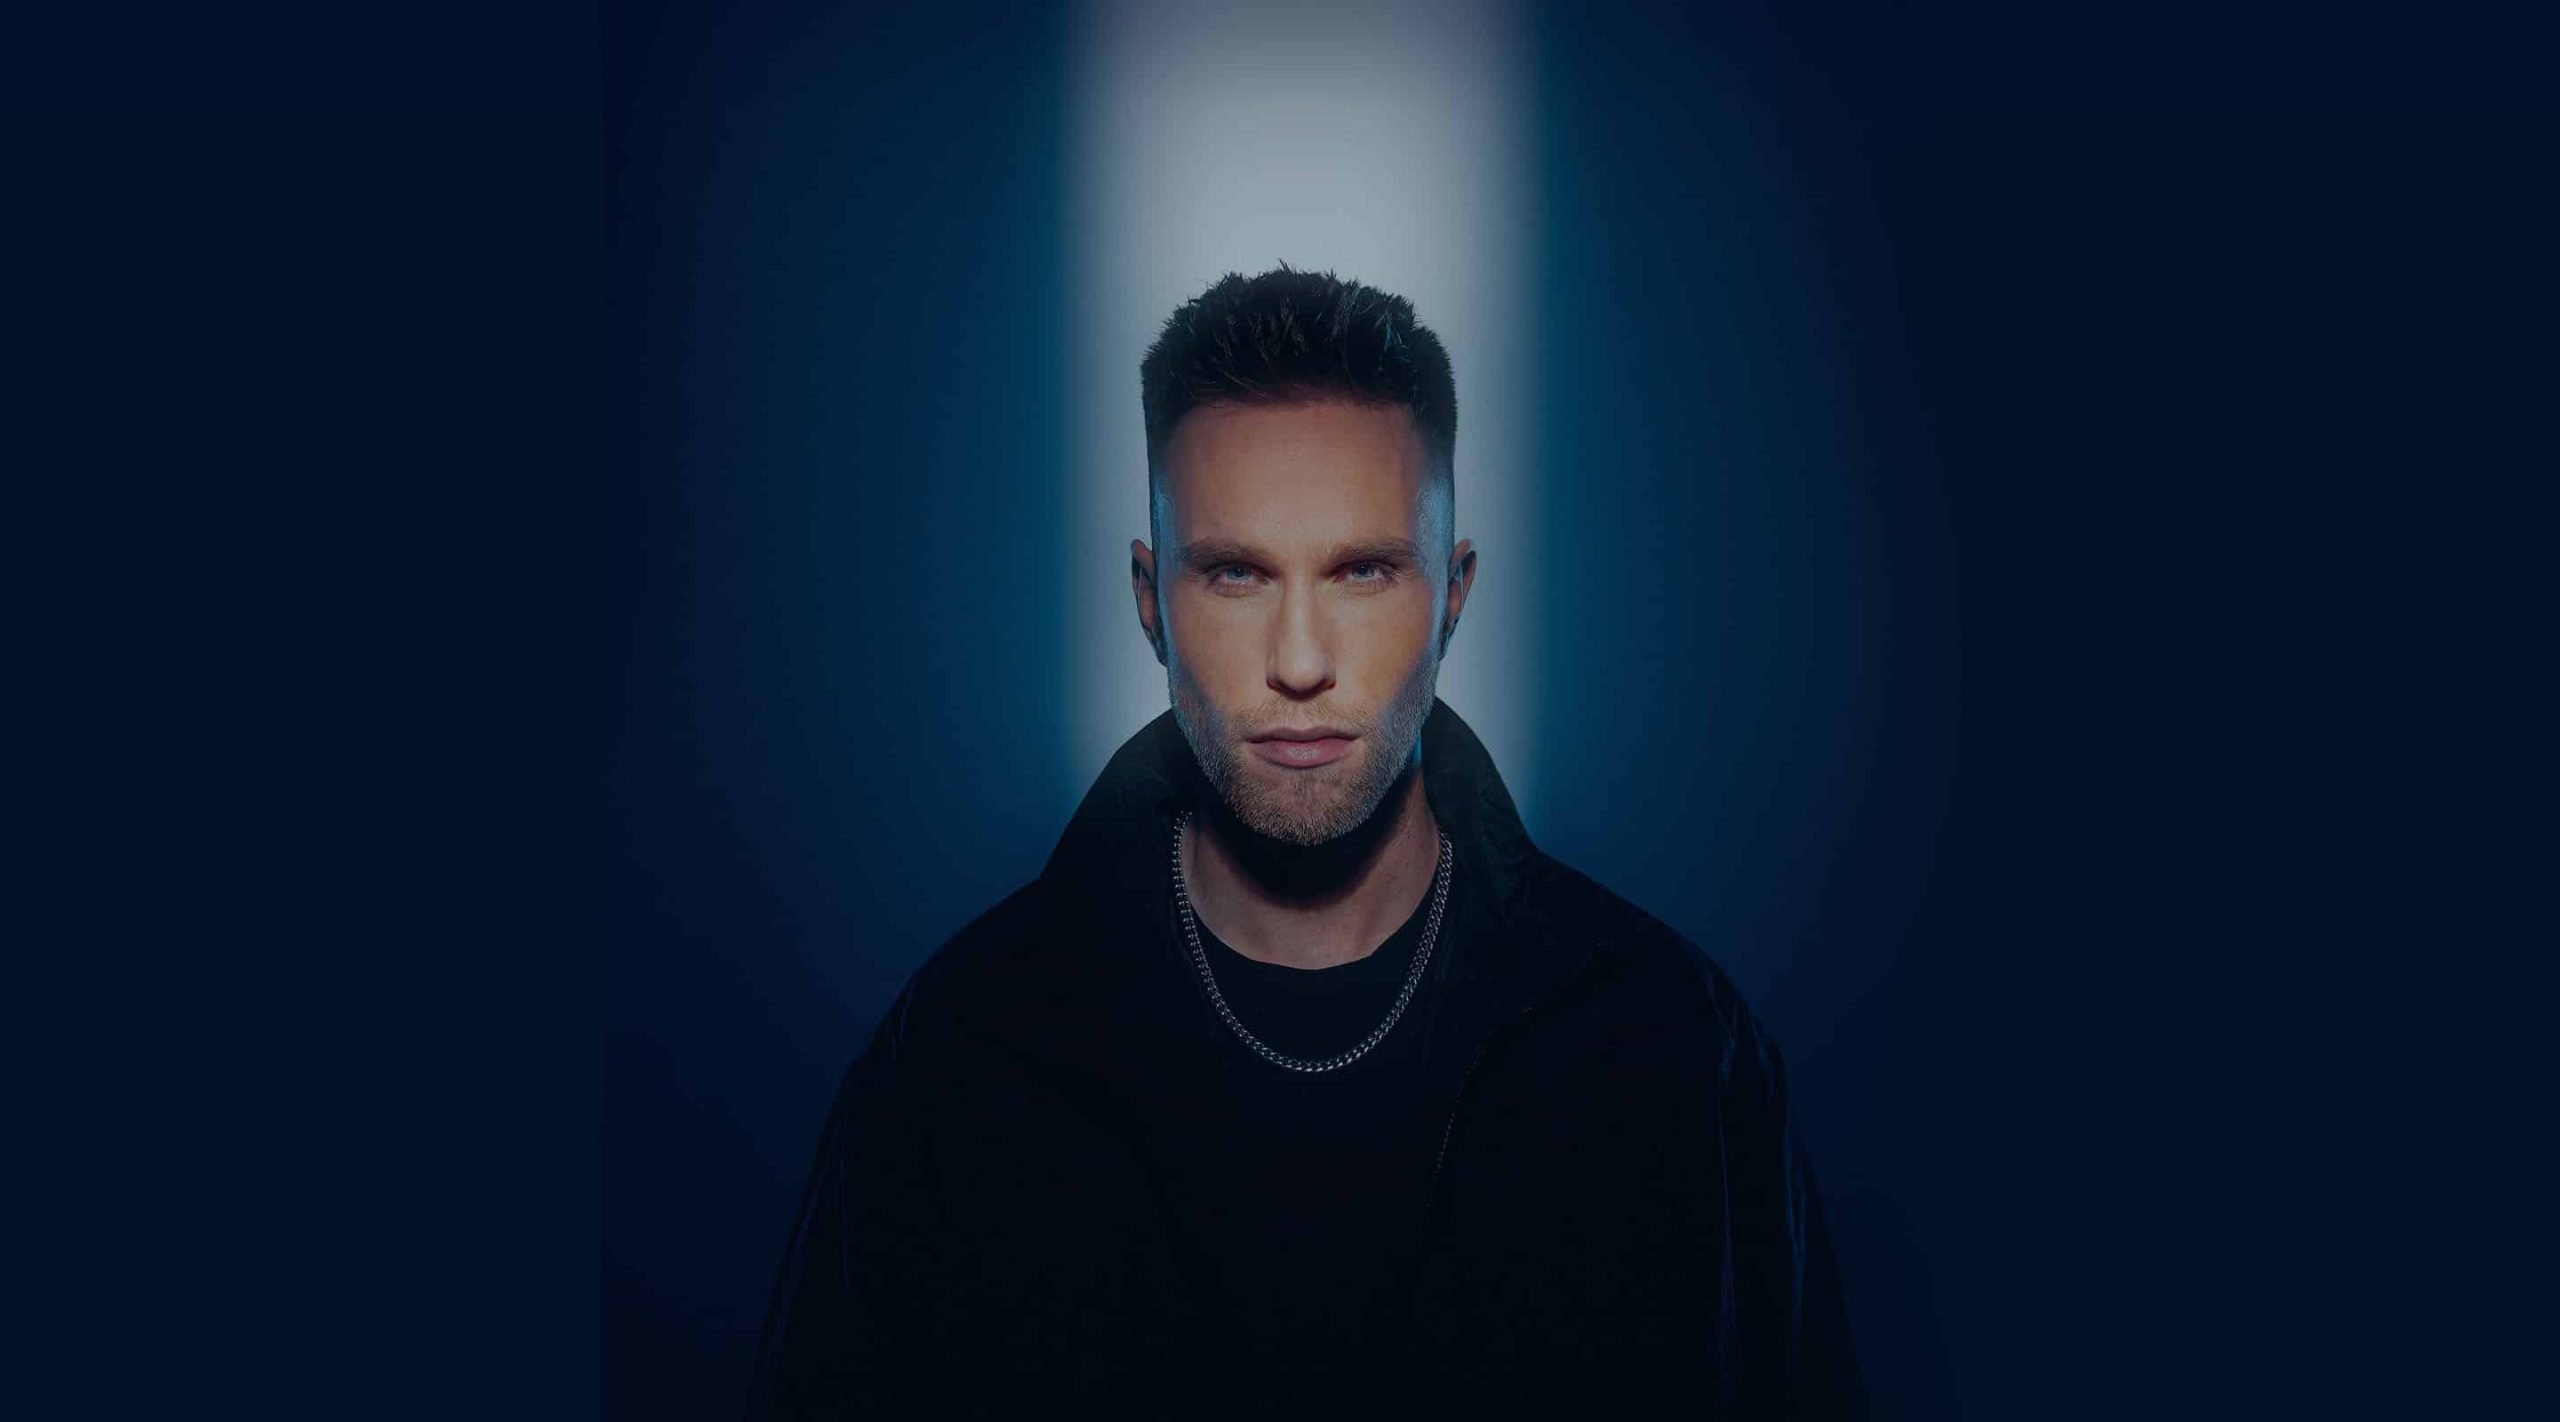 Nicky Romero unveils ‘Nightvision’, his first ever solo concert